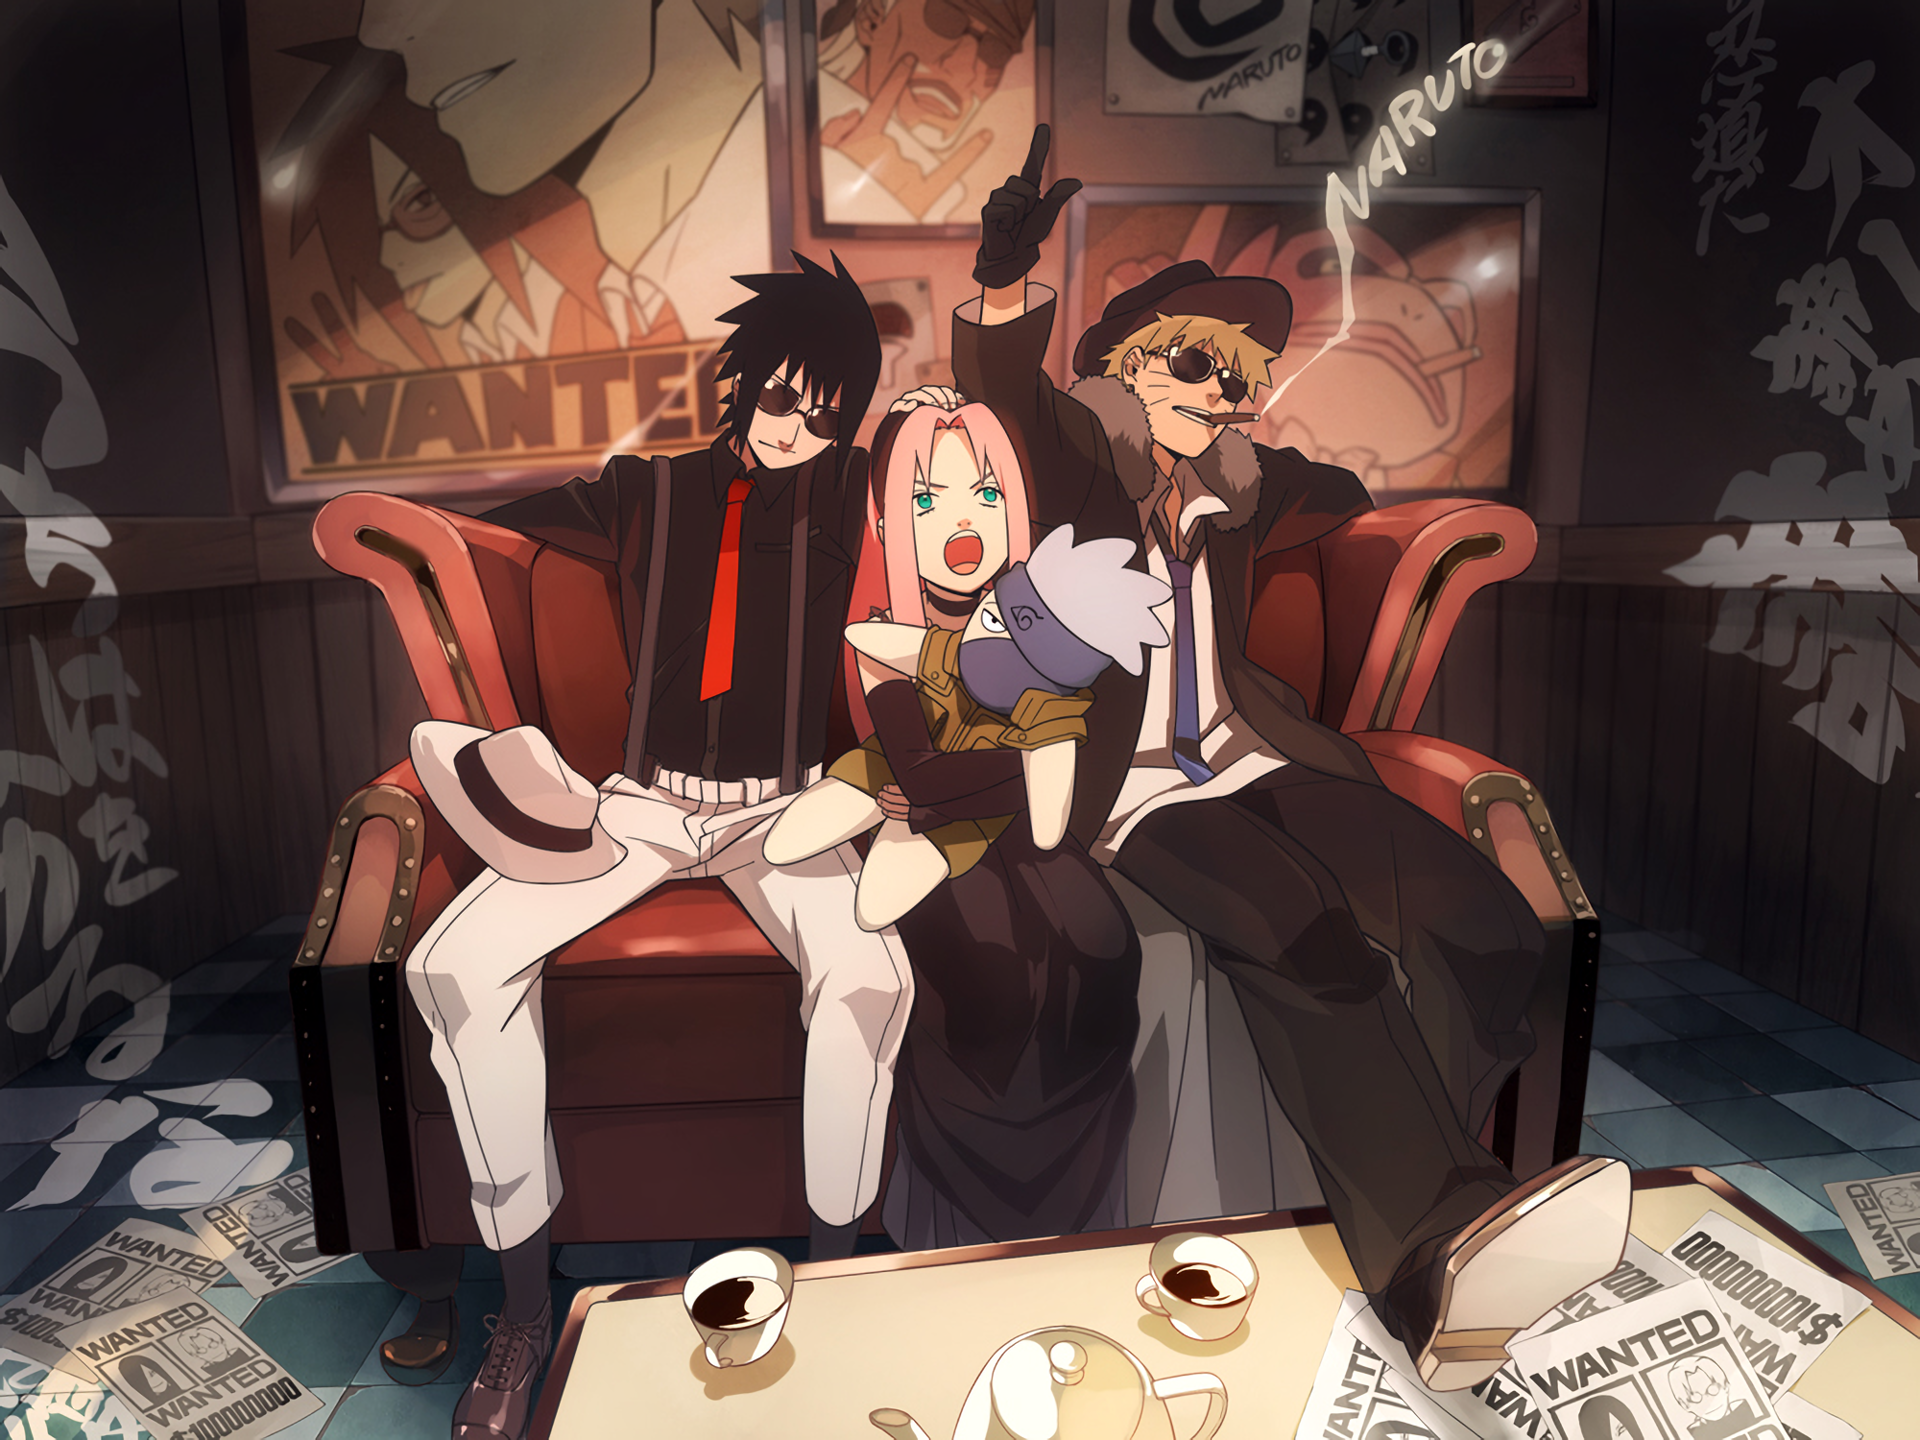 Naruto: Wanted by ミン (pixiv)